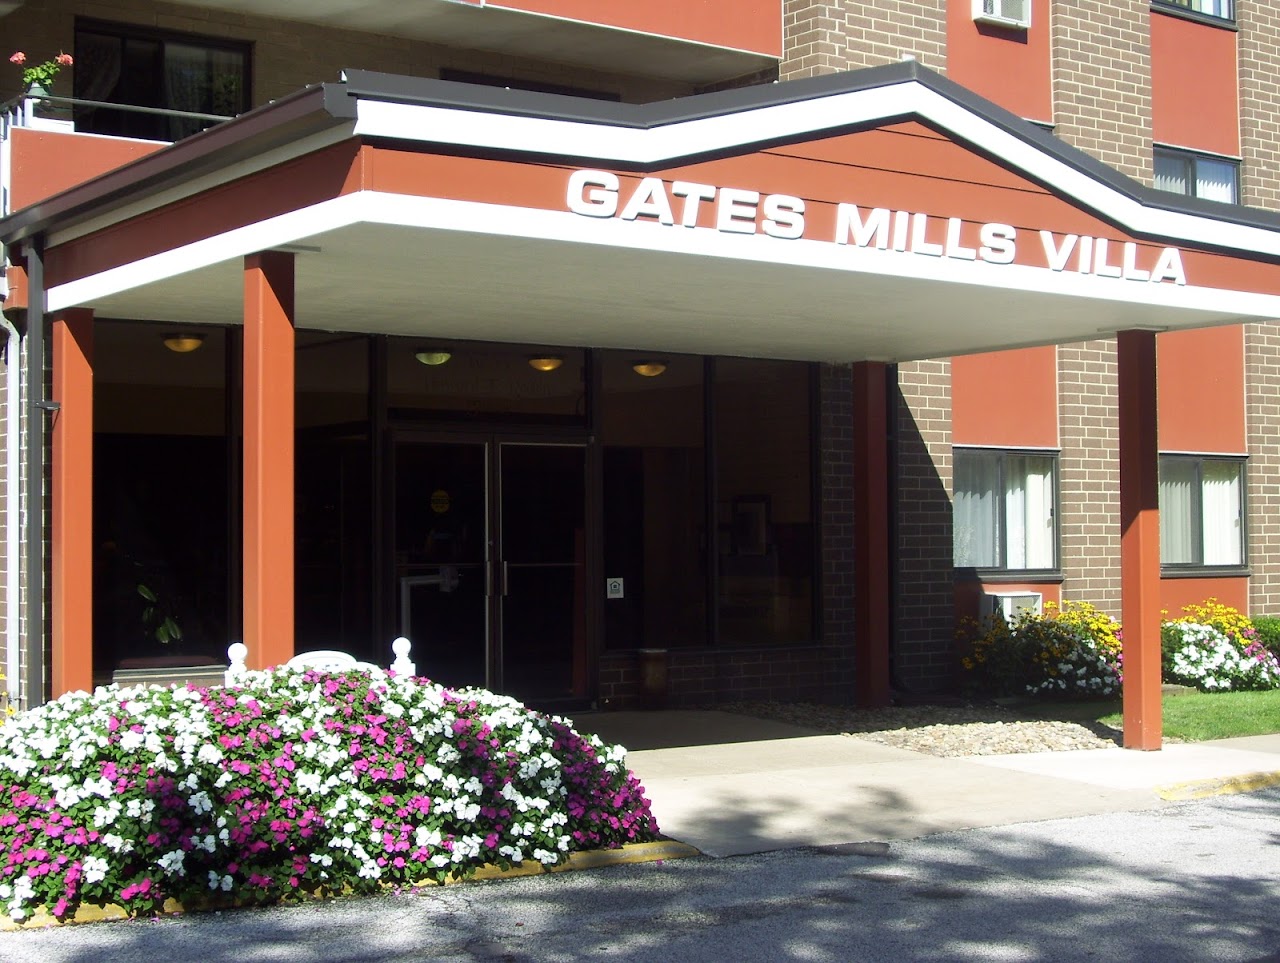 Photo of GATES MILLS VILLA. Affordable housing located at 6755 MAYFIELD RD MAYFIELD HEIGHTS, OH 44124